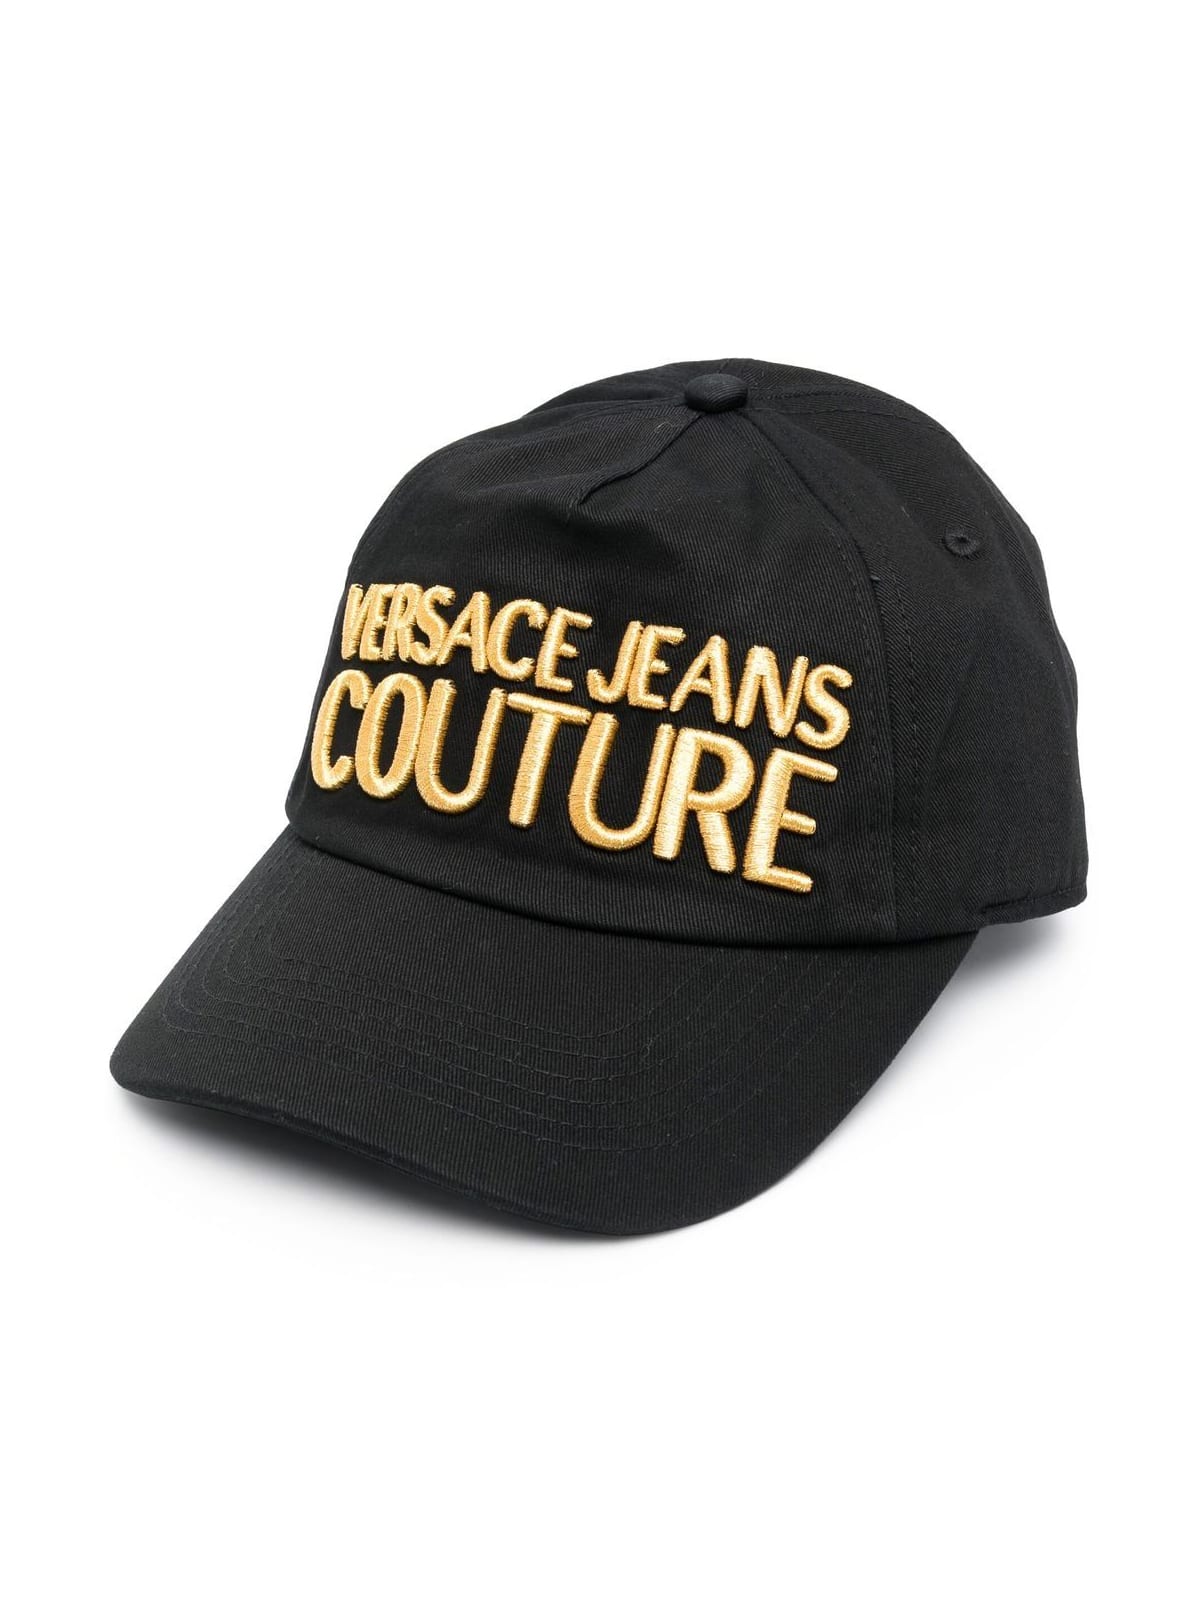 Versace Jeans Couture Baseball Cap With Pences Basic